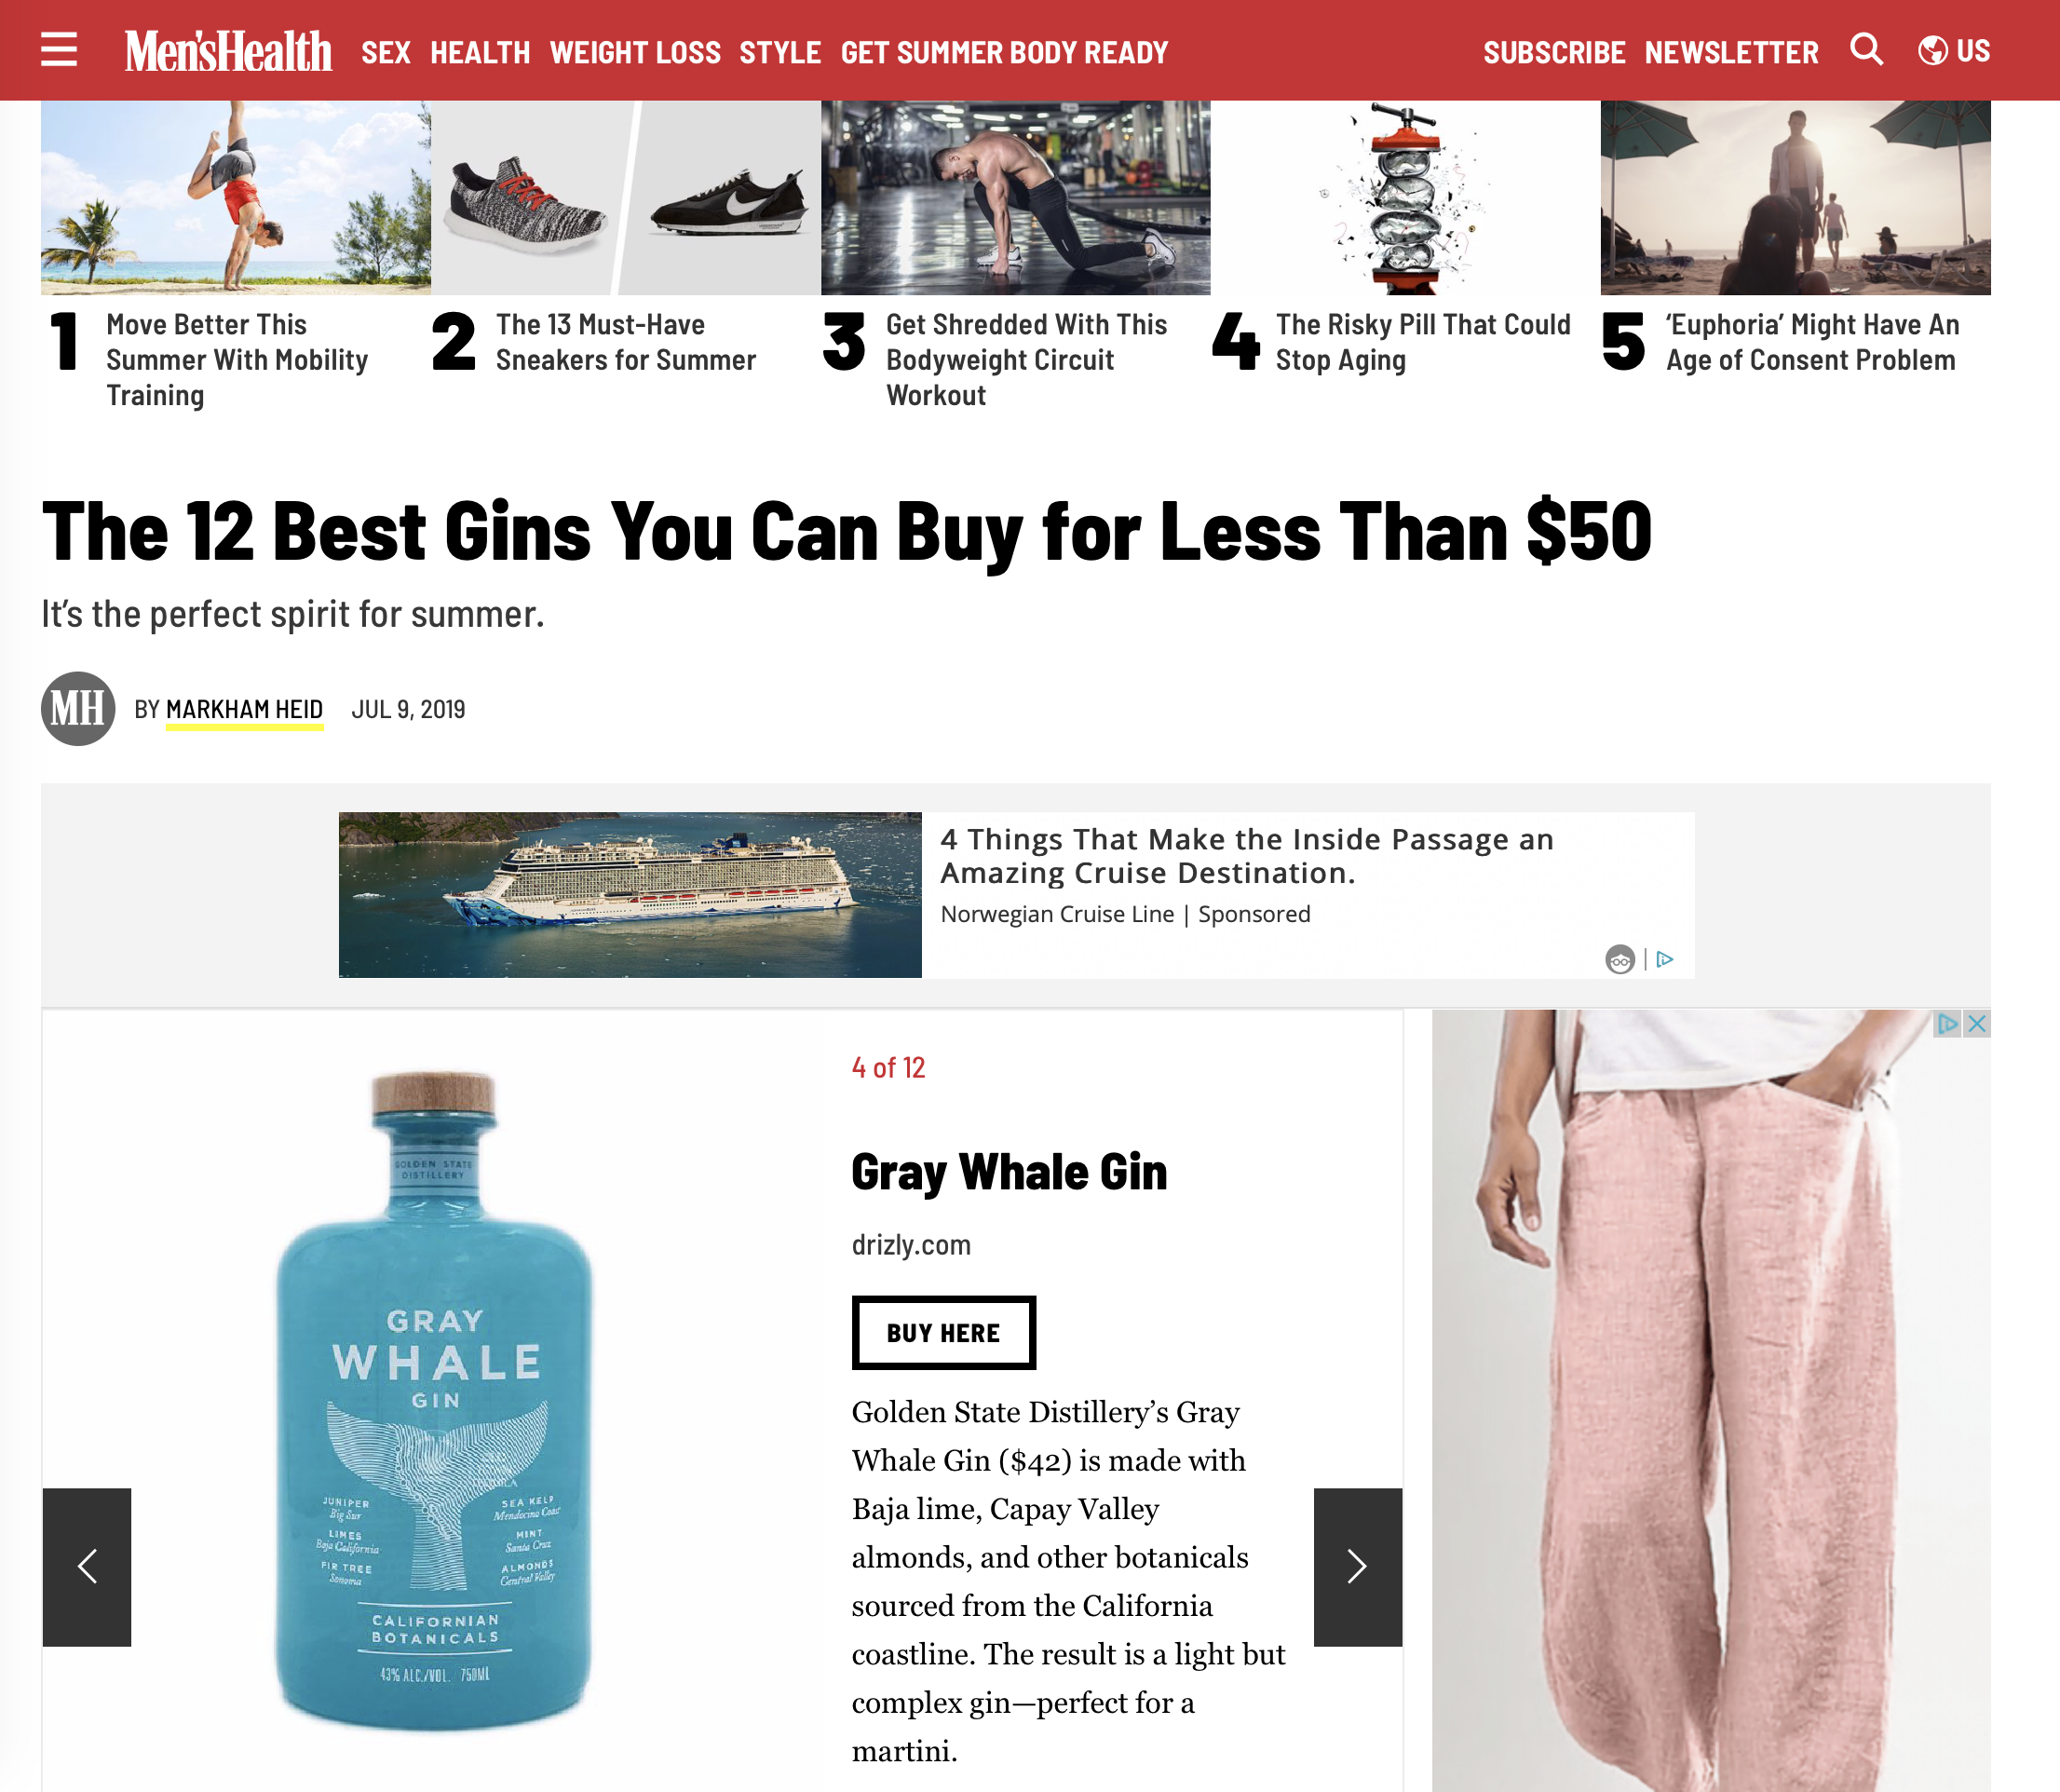 mens health features gray whale gin